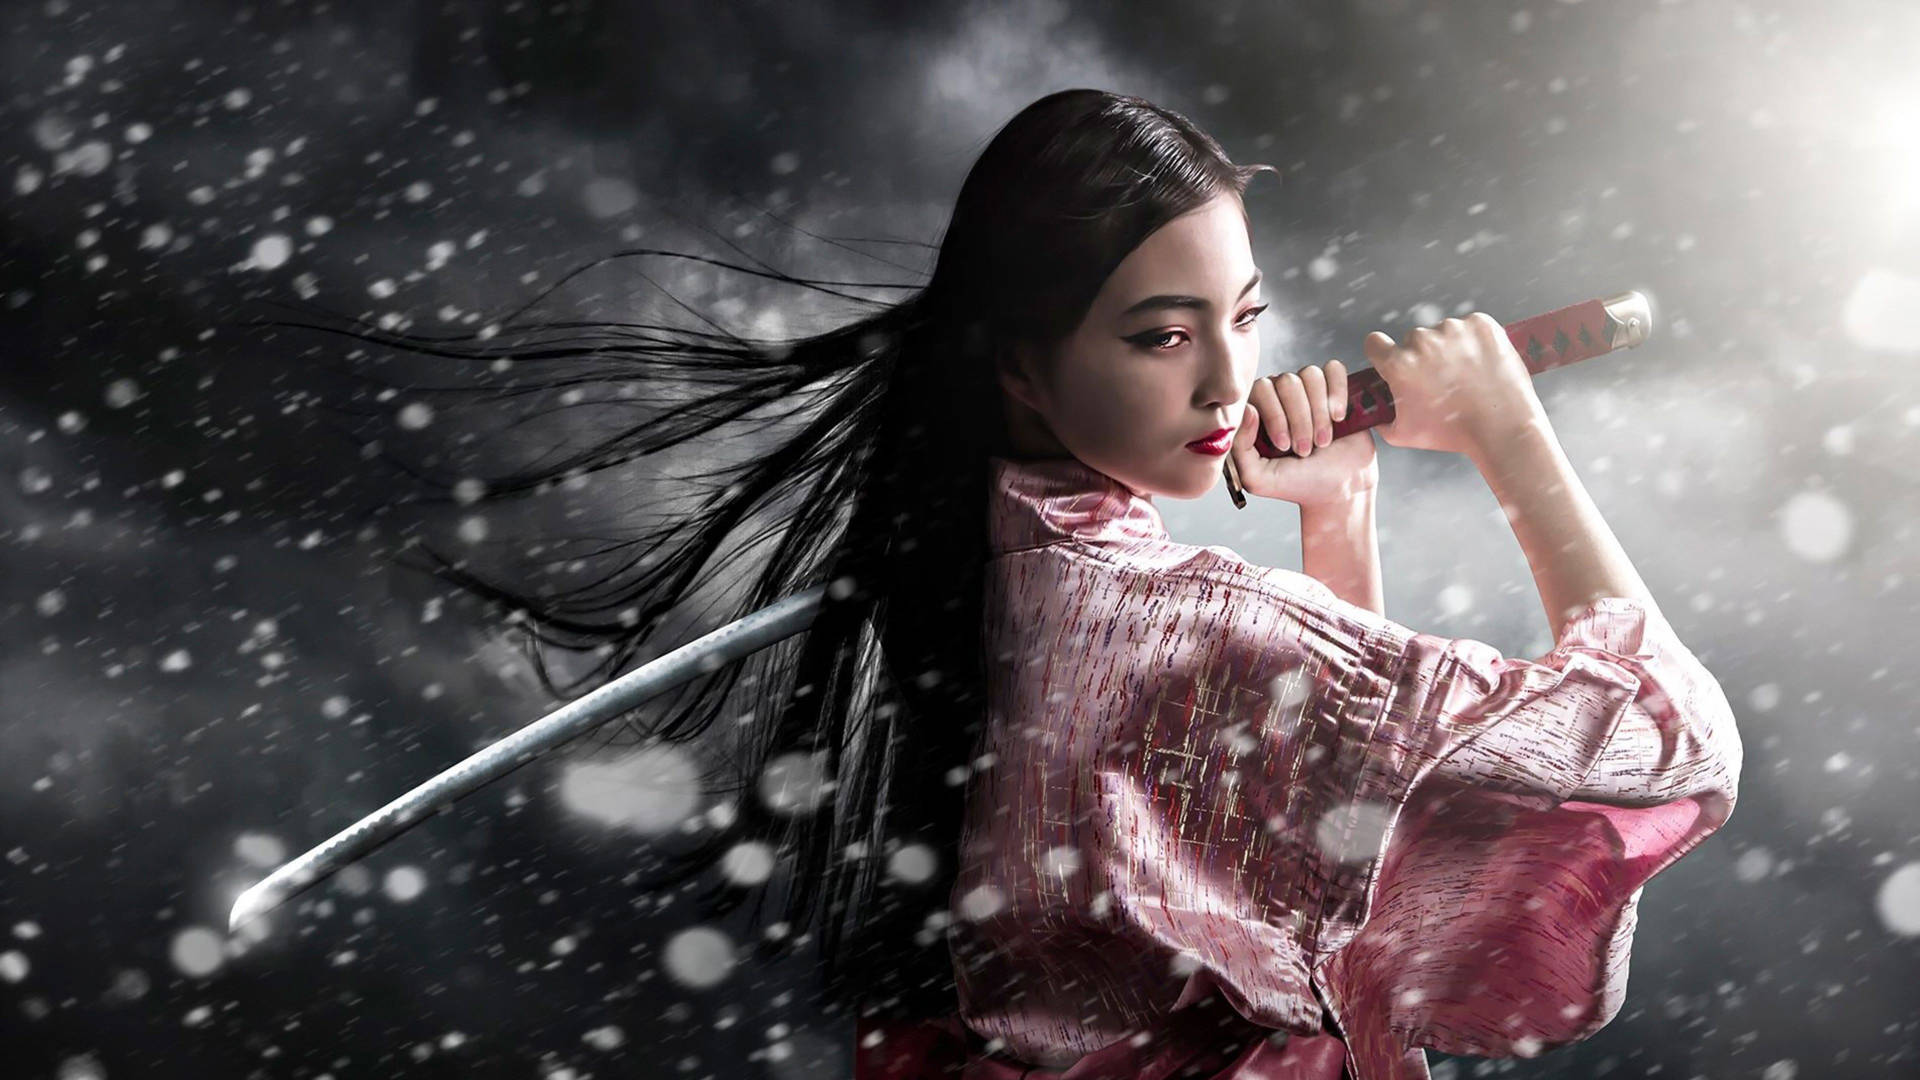 Dramatic Japanese Girl With Sword Wallpaper